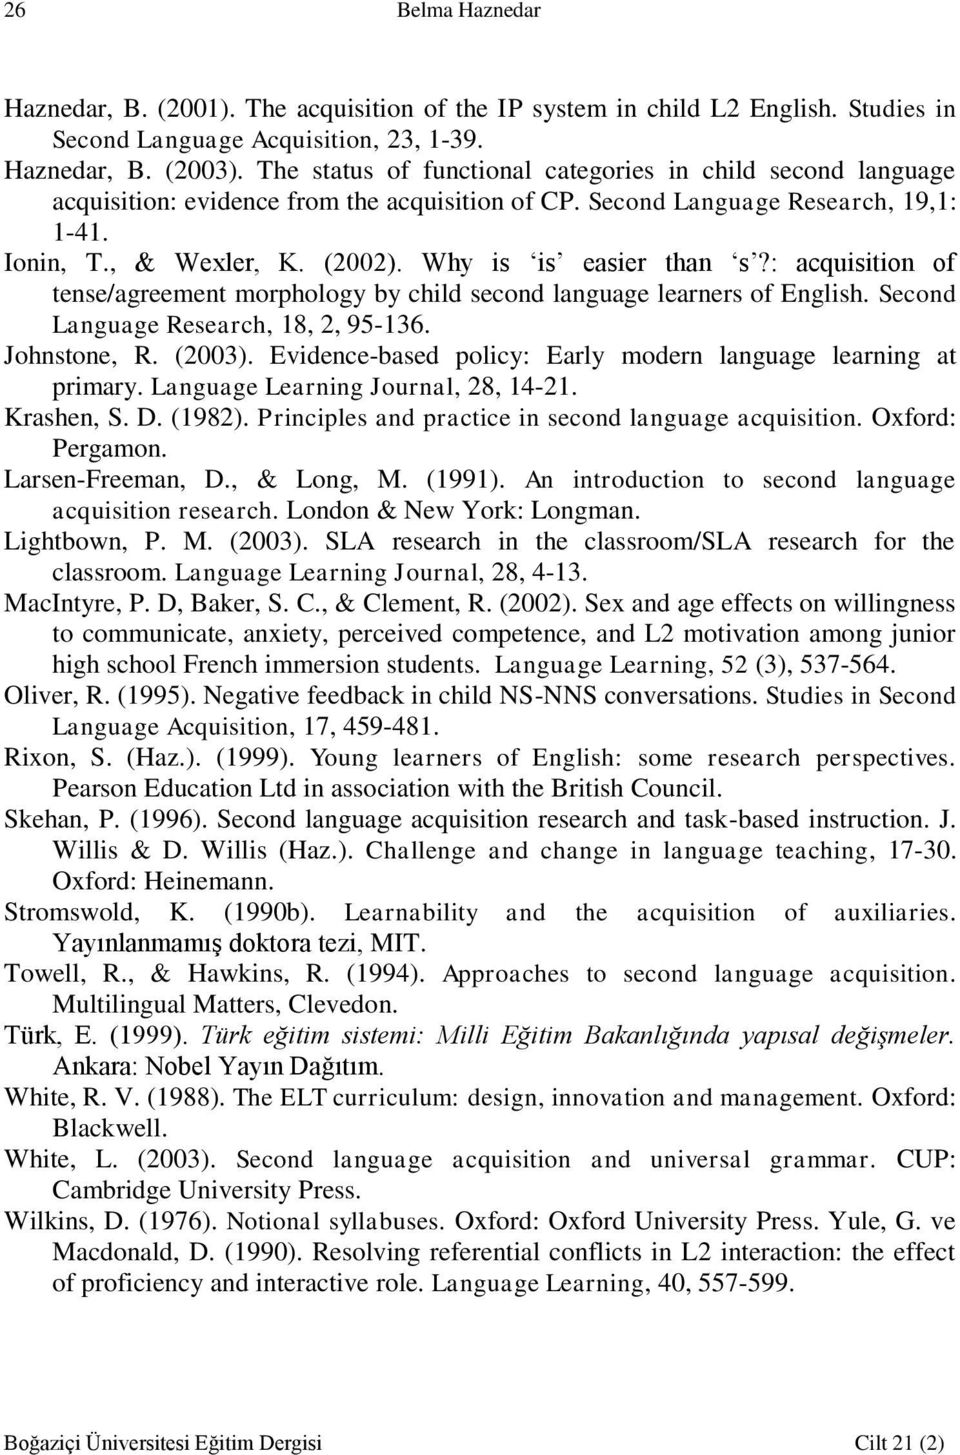 Why is is easier than s?: acquisition of tense/agreement morphology by child second language learners of English. Second Language Research, 18, 2, 95-136. Johnstone, R. (2003).